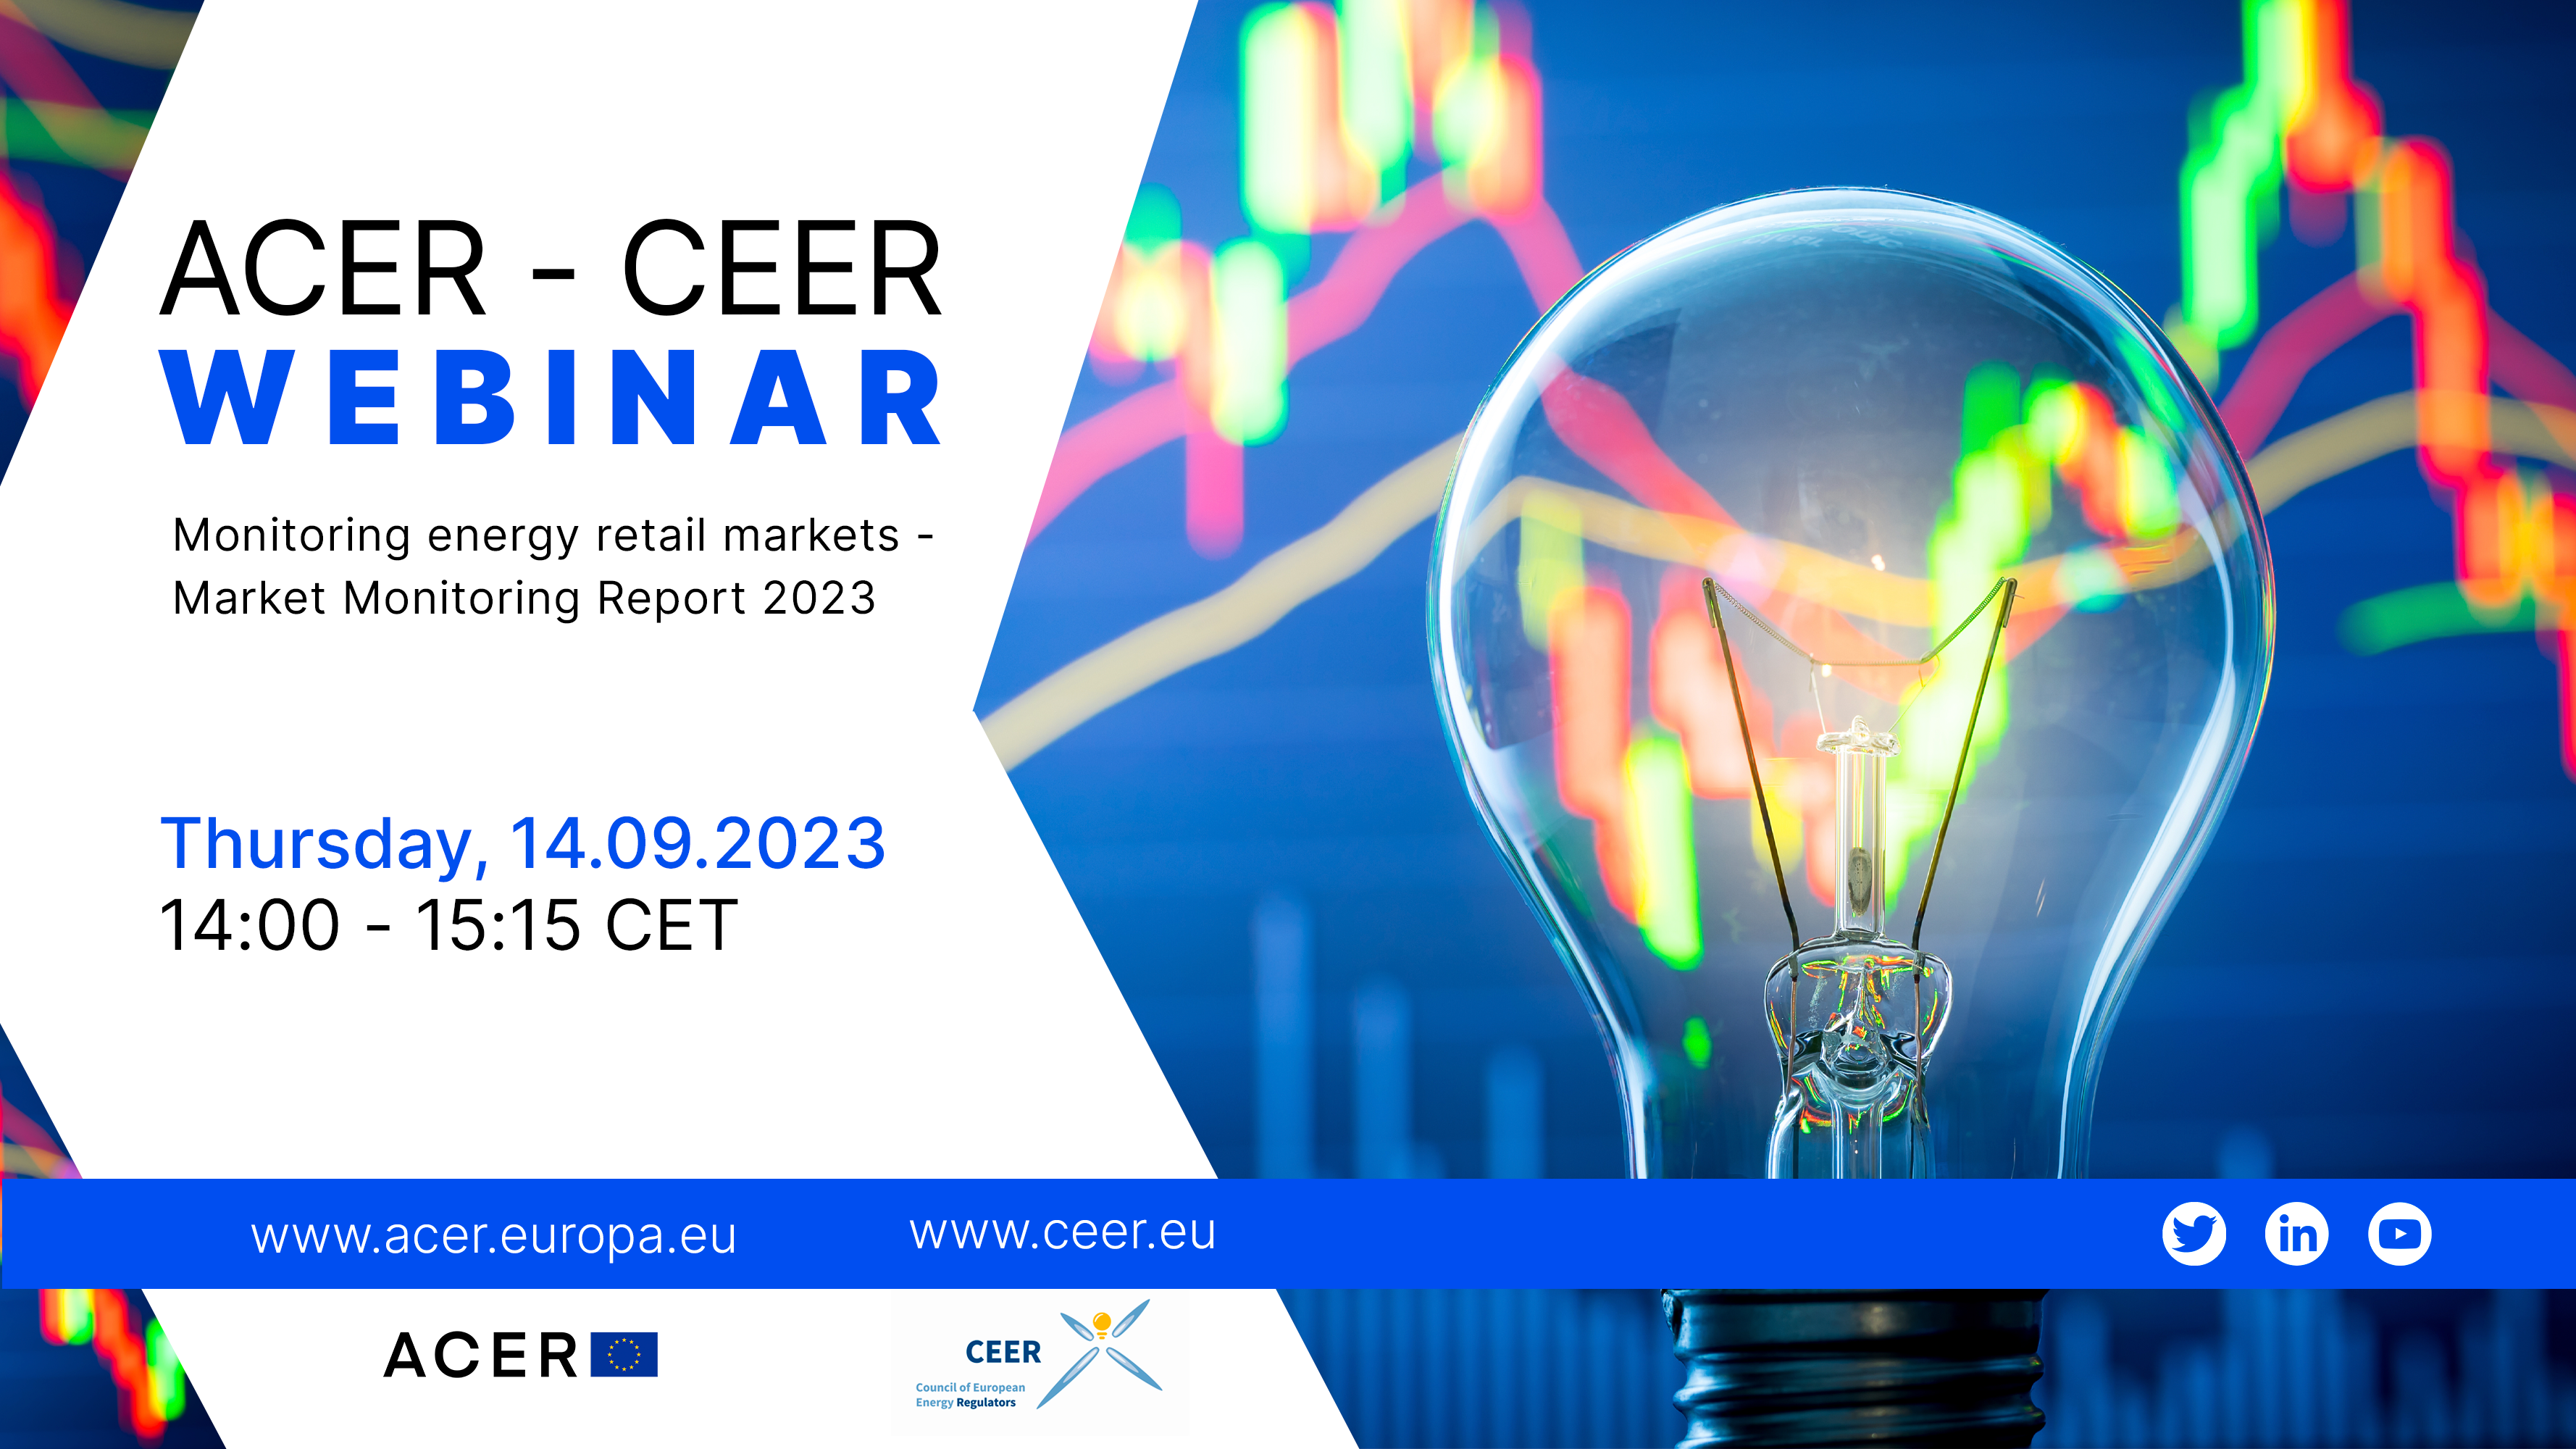 ACER-CEER webinar: Monitoring energy retail markets and consumer protection